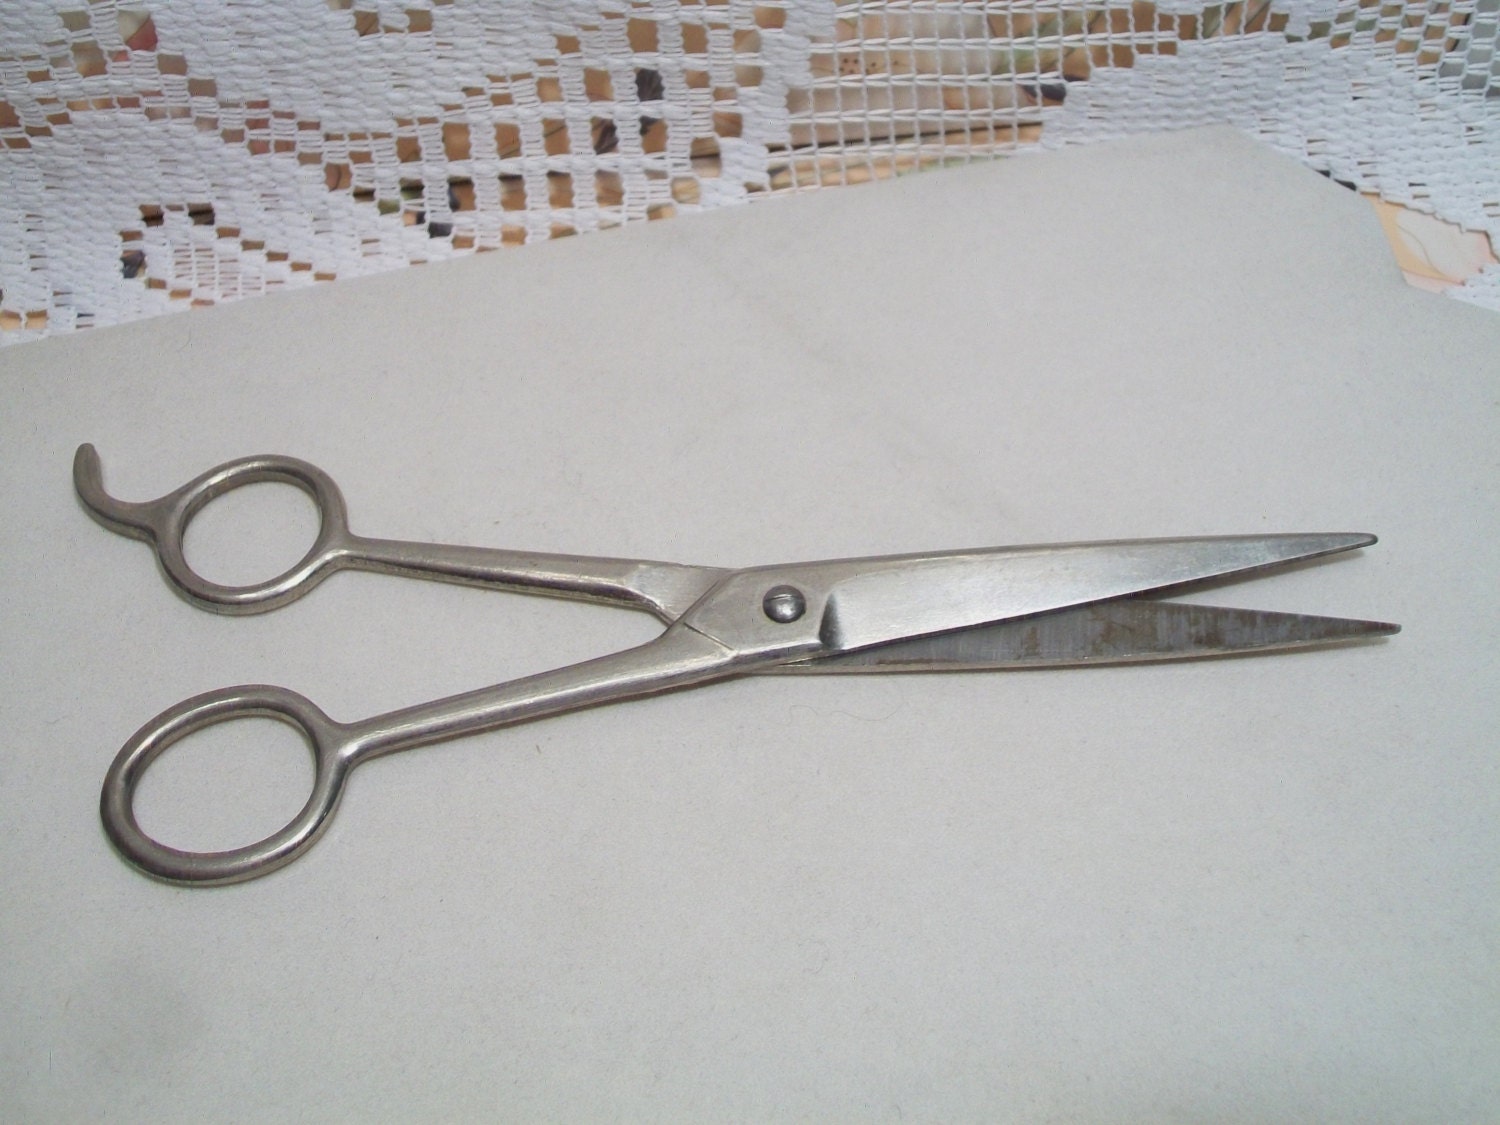 Best Vintage-Style Scissors for Cutting and Trimming –